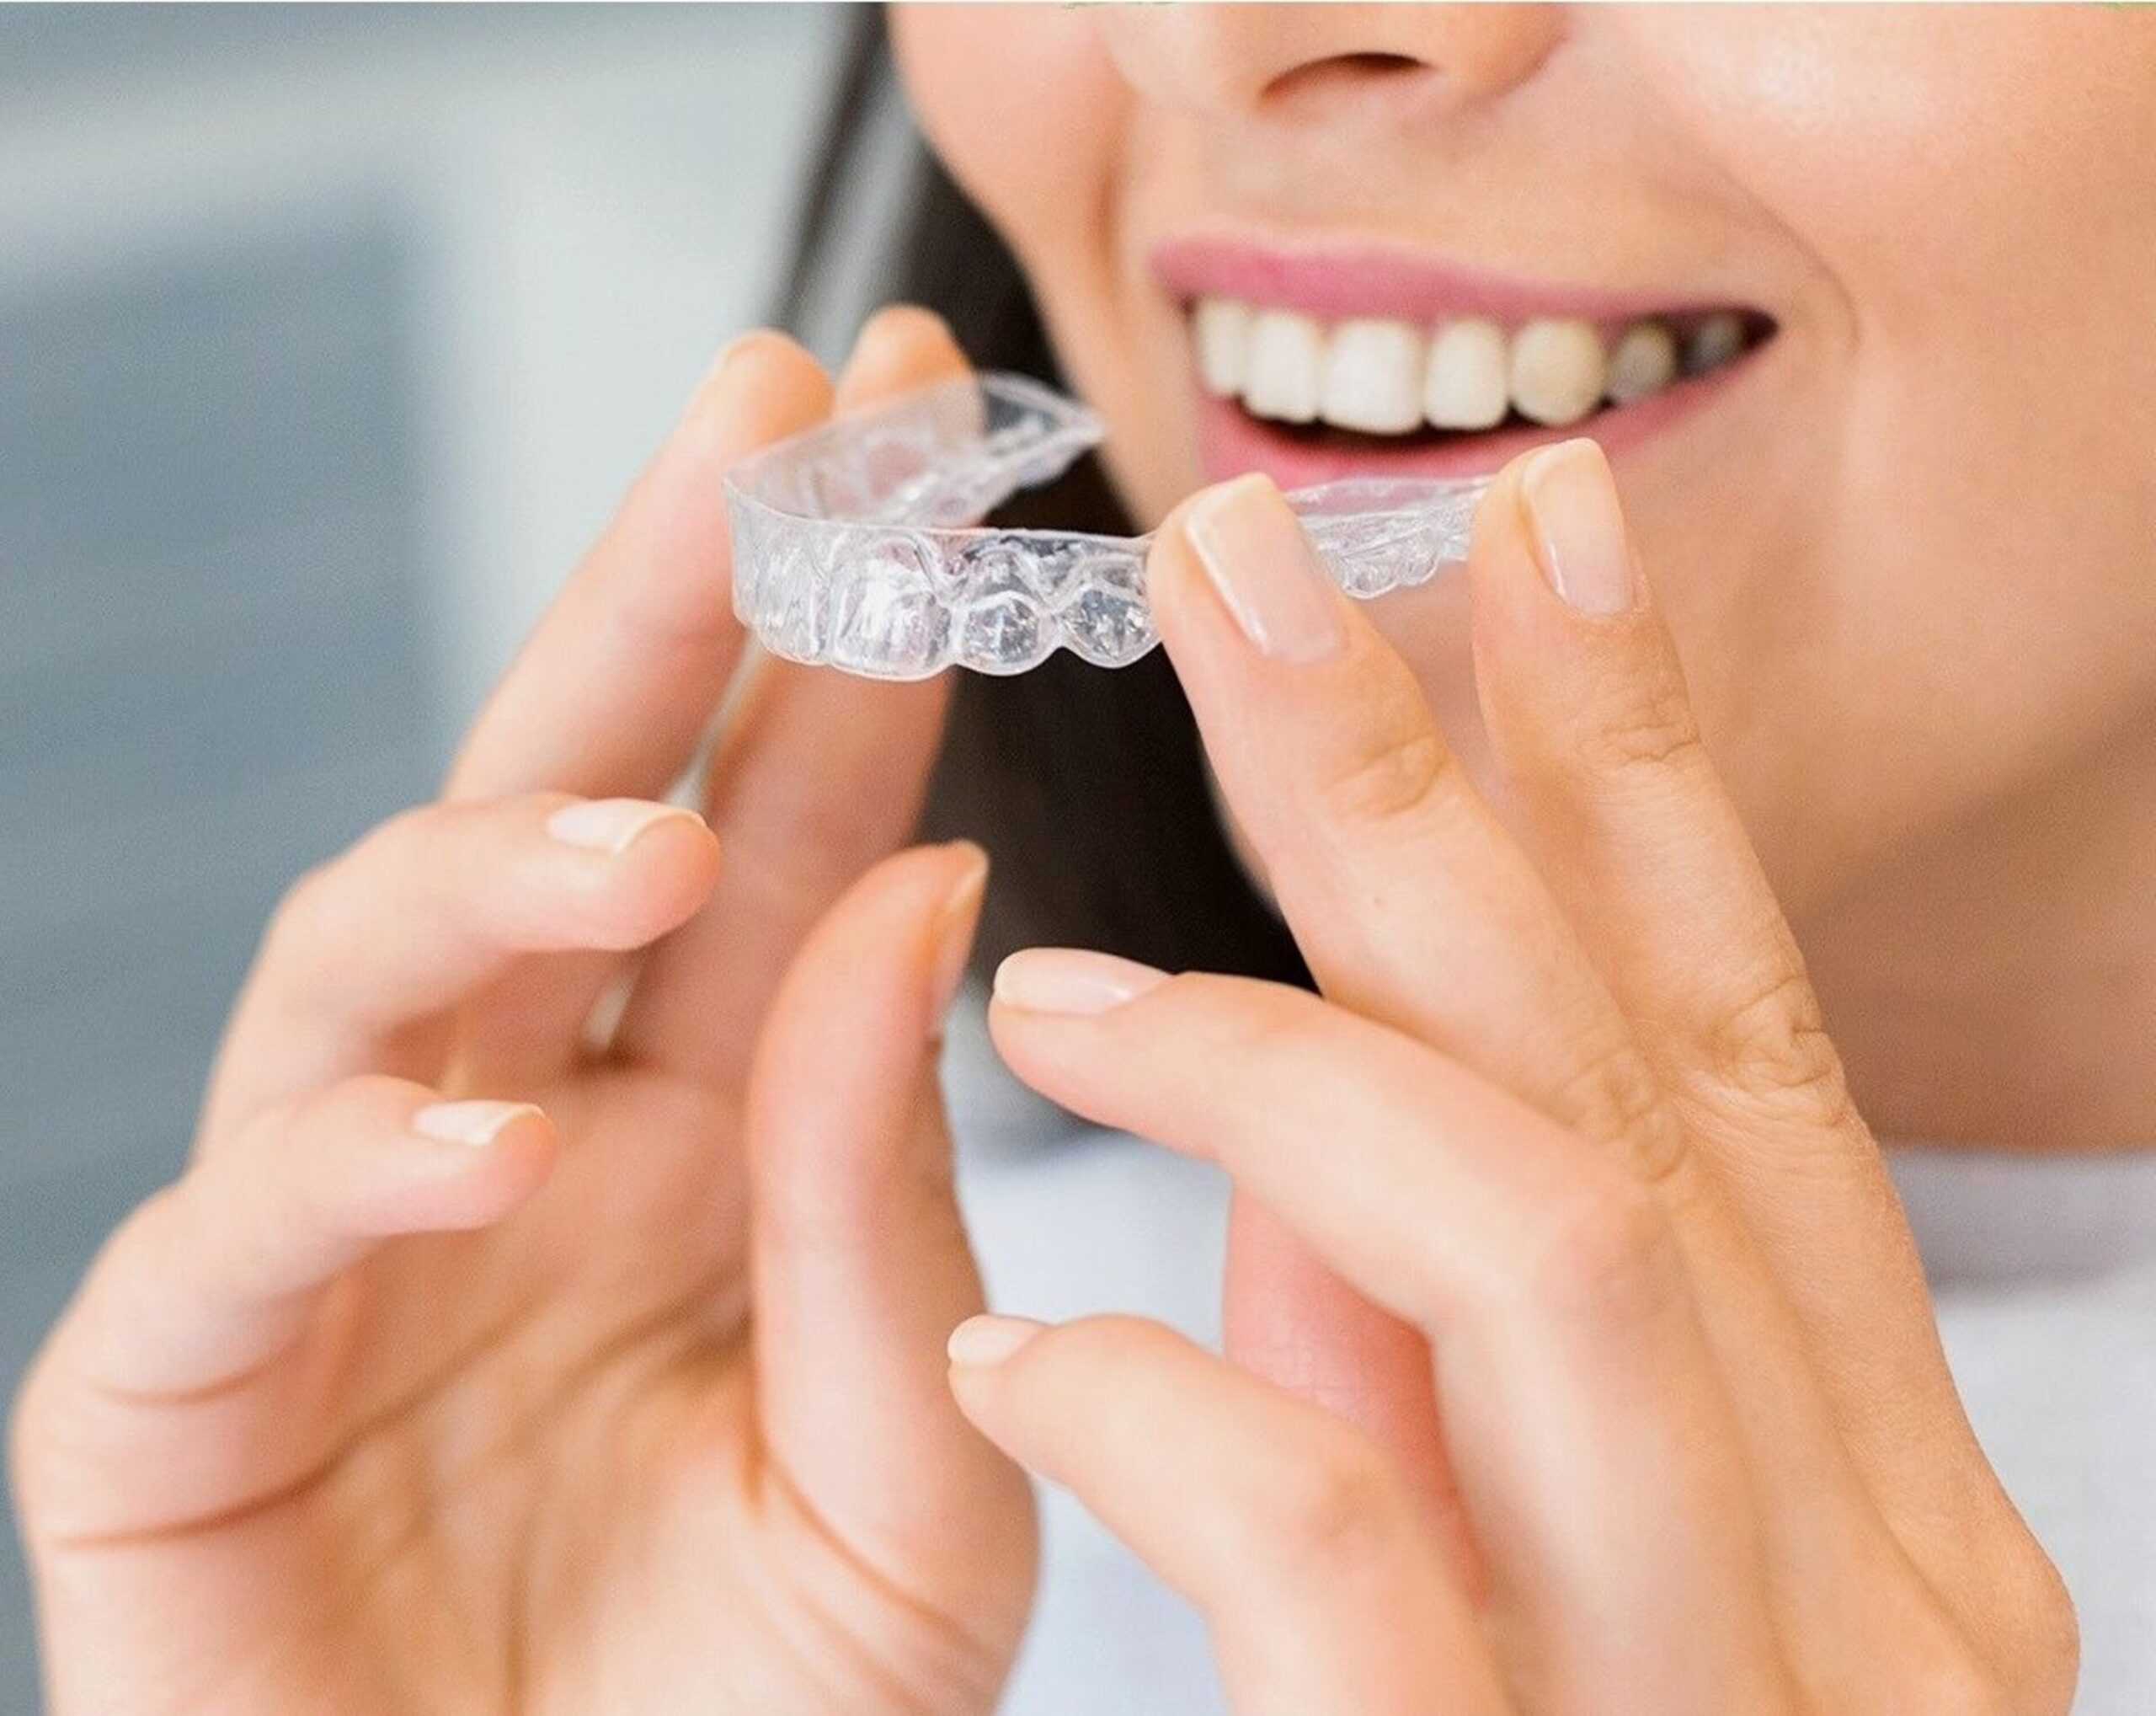 how to keep Invisalign retainers clean, keeping Invisalign retainers clean, Invisalign cleaner, ways to clean Invisalign